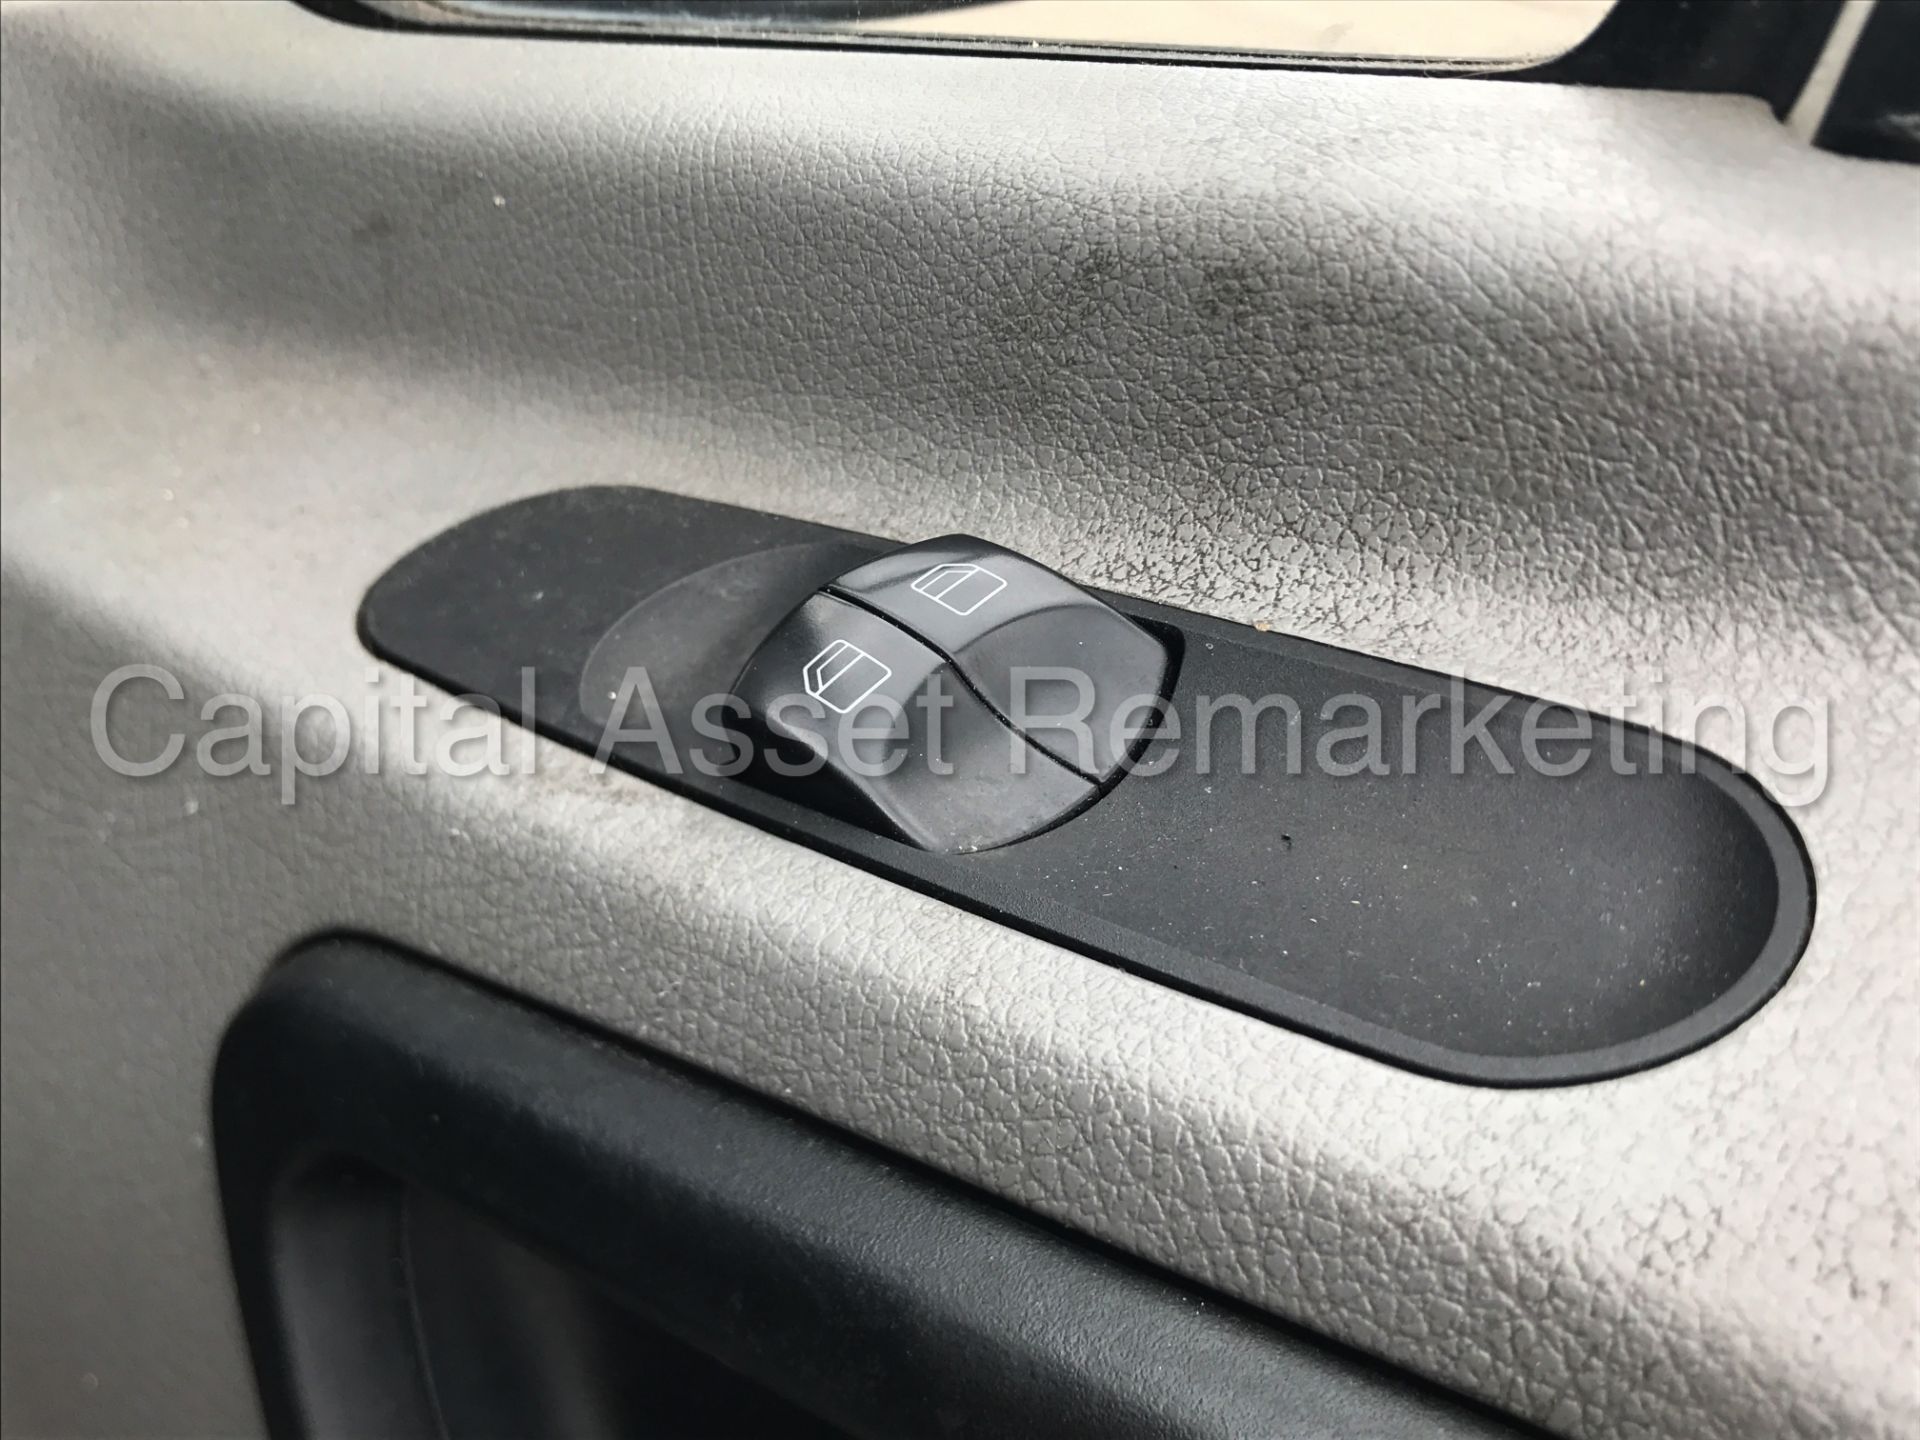 MERCEDES-BENZ SPRINTER 313 CDI 'MWB HI-ROOF' (2014) '130 BHP - 6 SPEED' (1 COMPANY OWNER FROM NEW) - Image 21 of 22